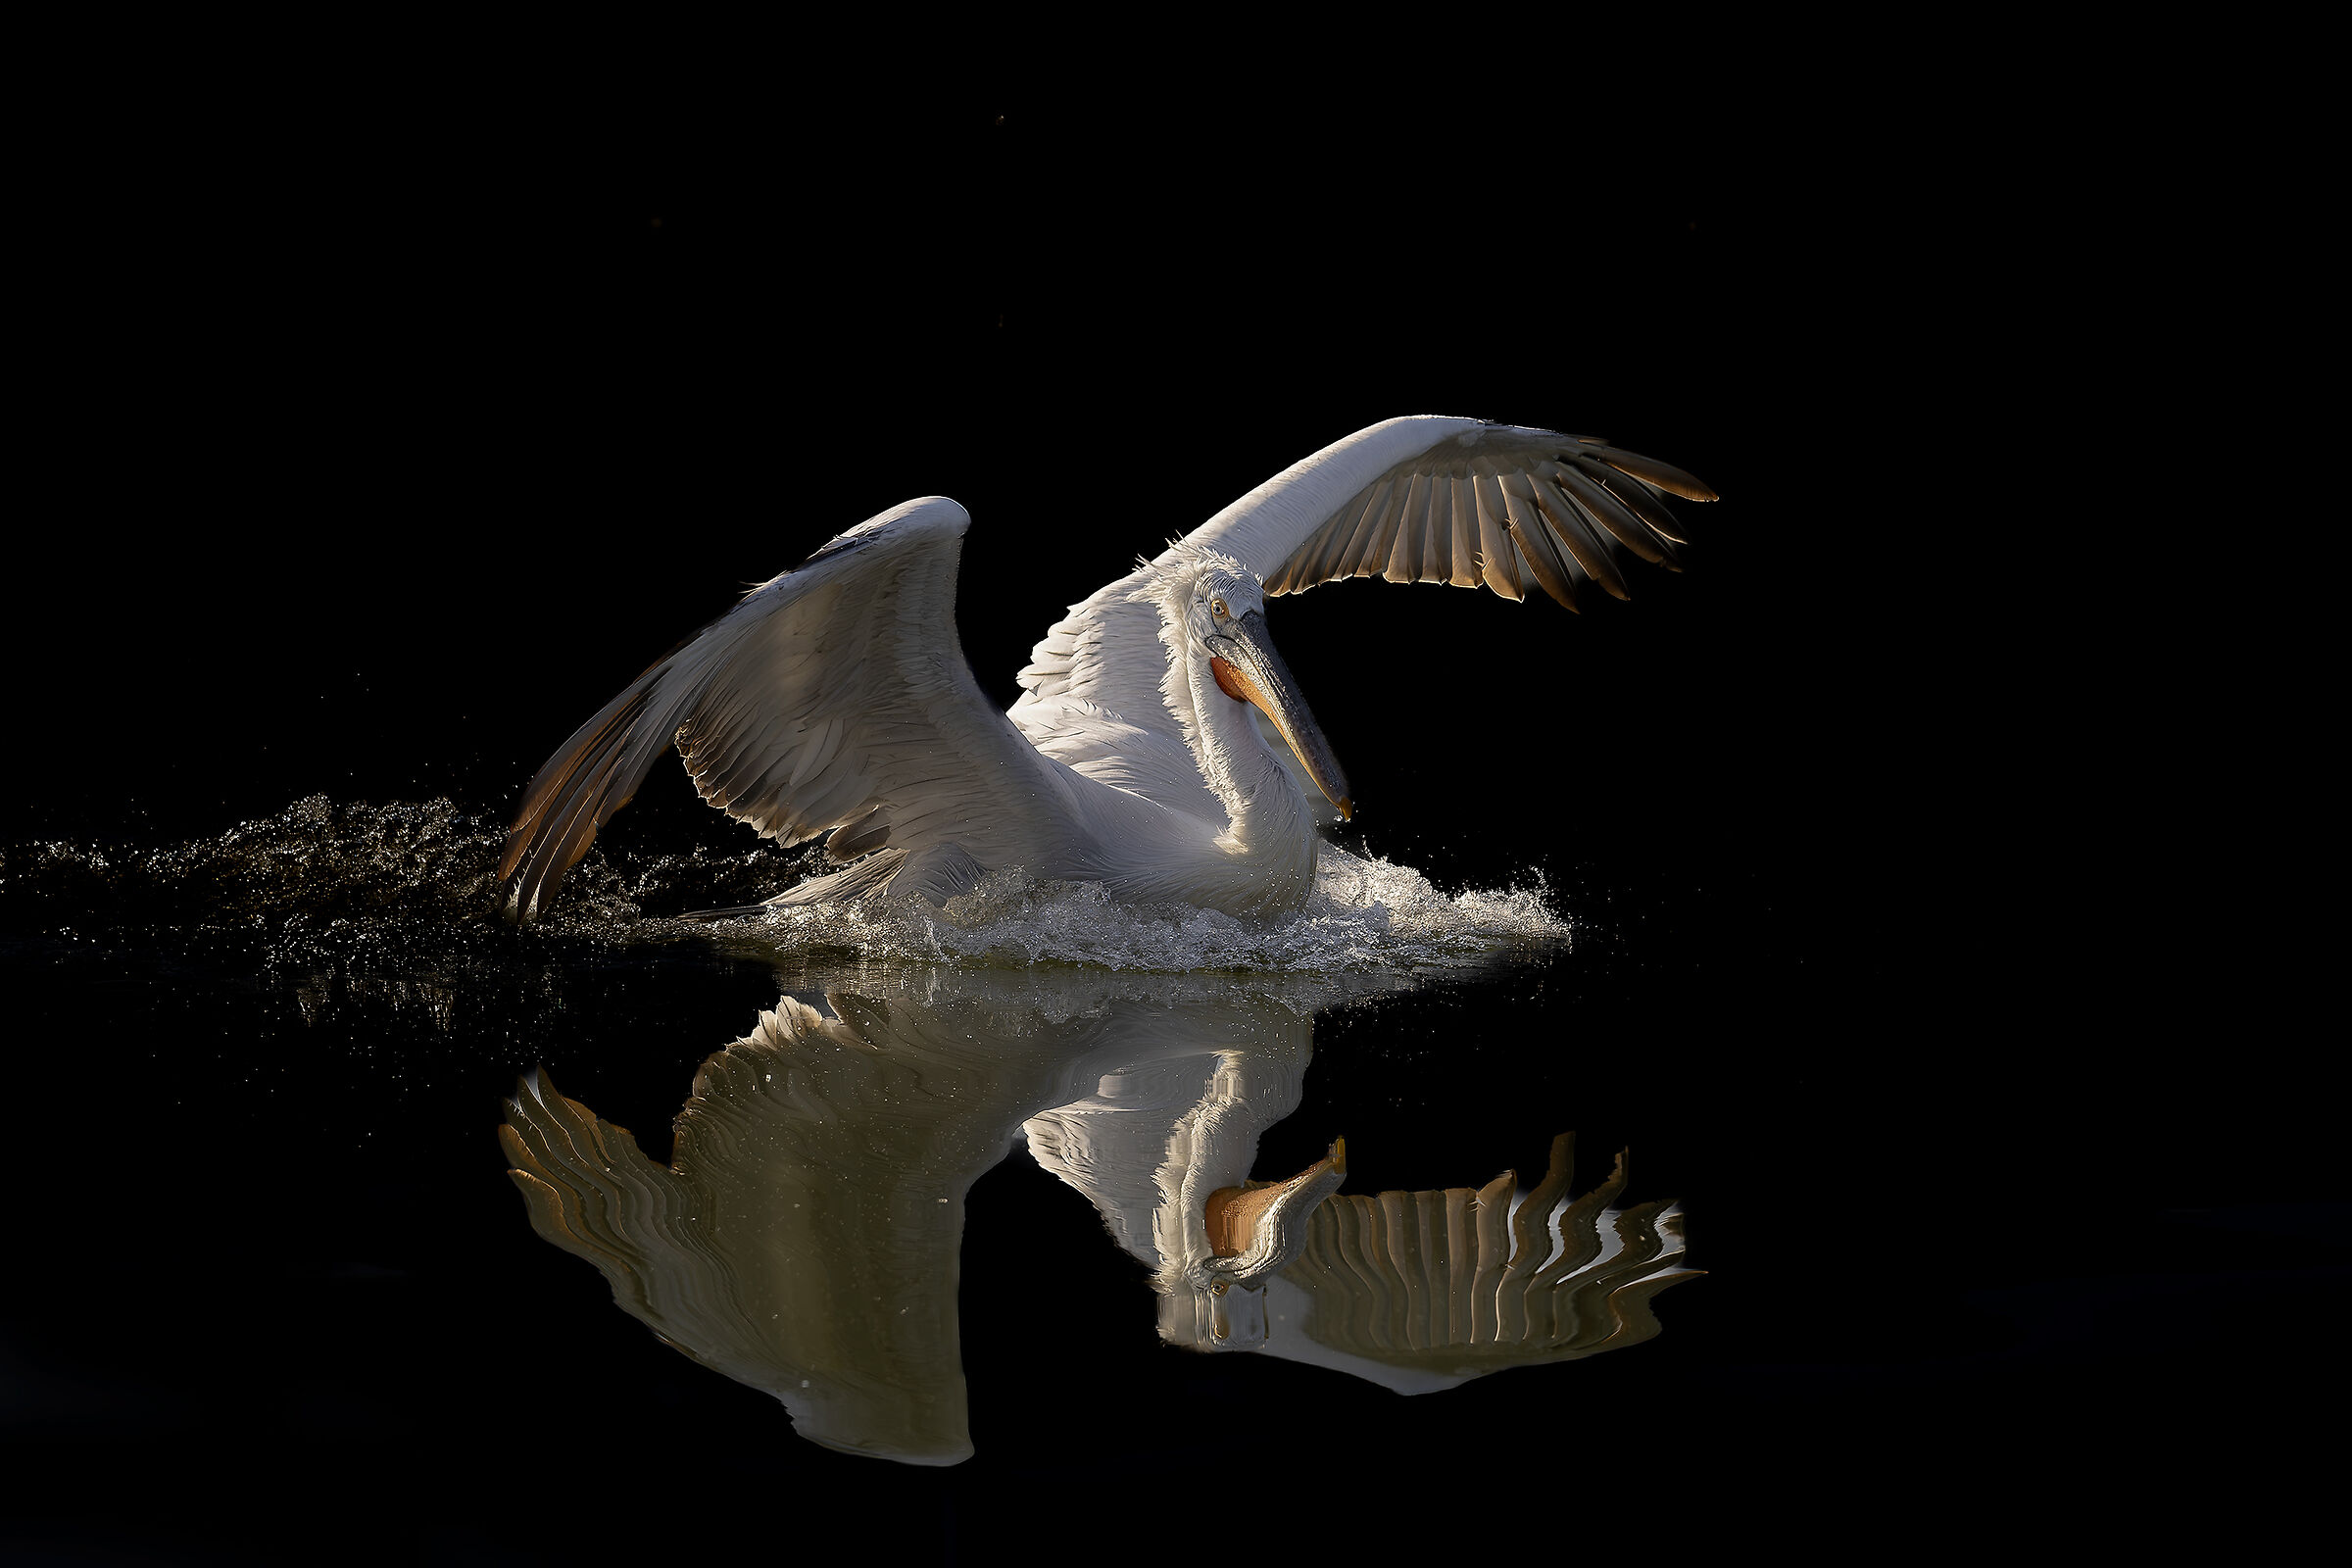 Mirrored glide of the curly pelican...